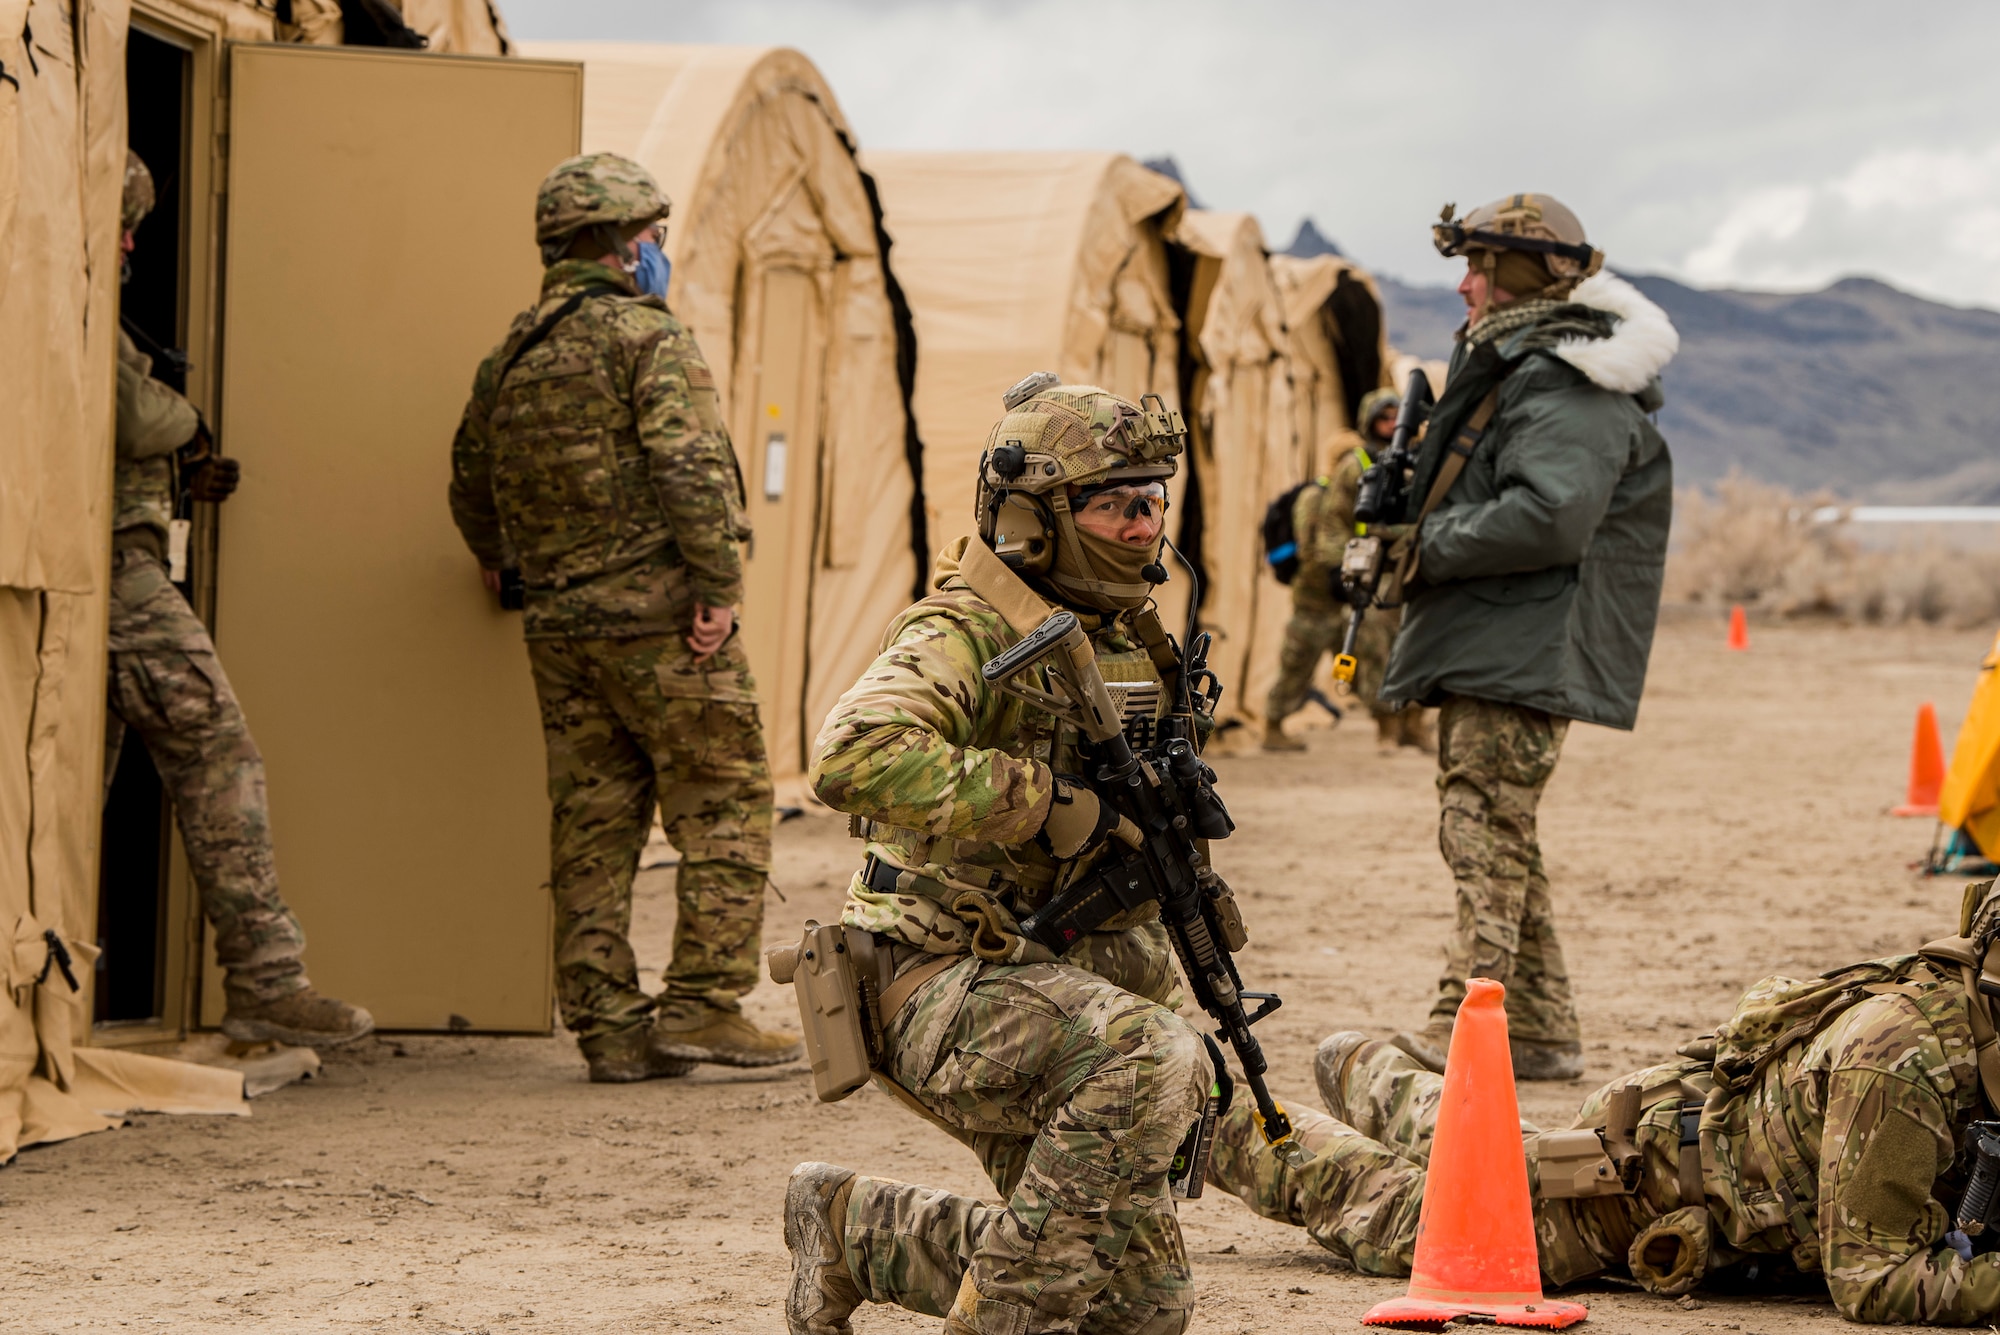 A Deployed Aircraft Ground Response Element Airman assigned to the 27th Special Operations Mission Support Team provides security during a 27th Special Operations Wing operational readiness exercise at Dugway Proving Grounds, Utah, March 22, 2021. The Mission Support Team concept provides a way forward in building small, scattered teams capable of operating independent of main operating bases. (U.S. Air Force photo by Senior Airman Vernon R. Walter III)